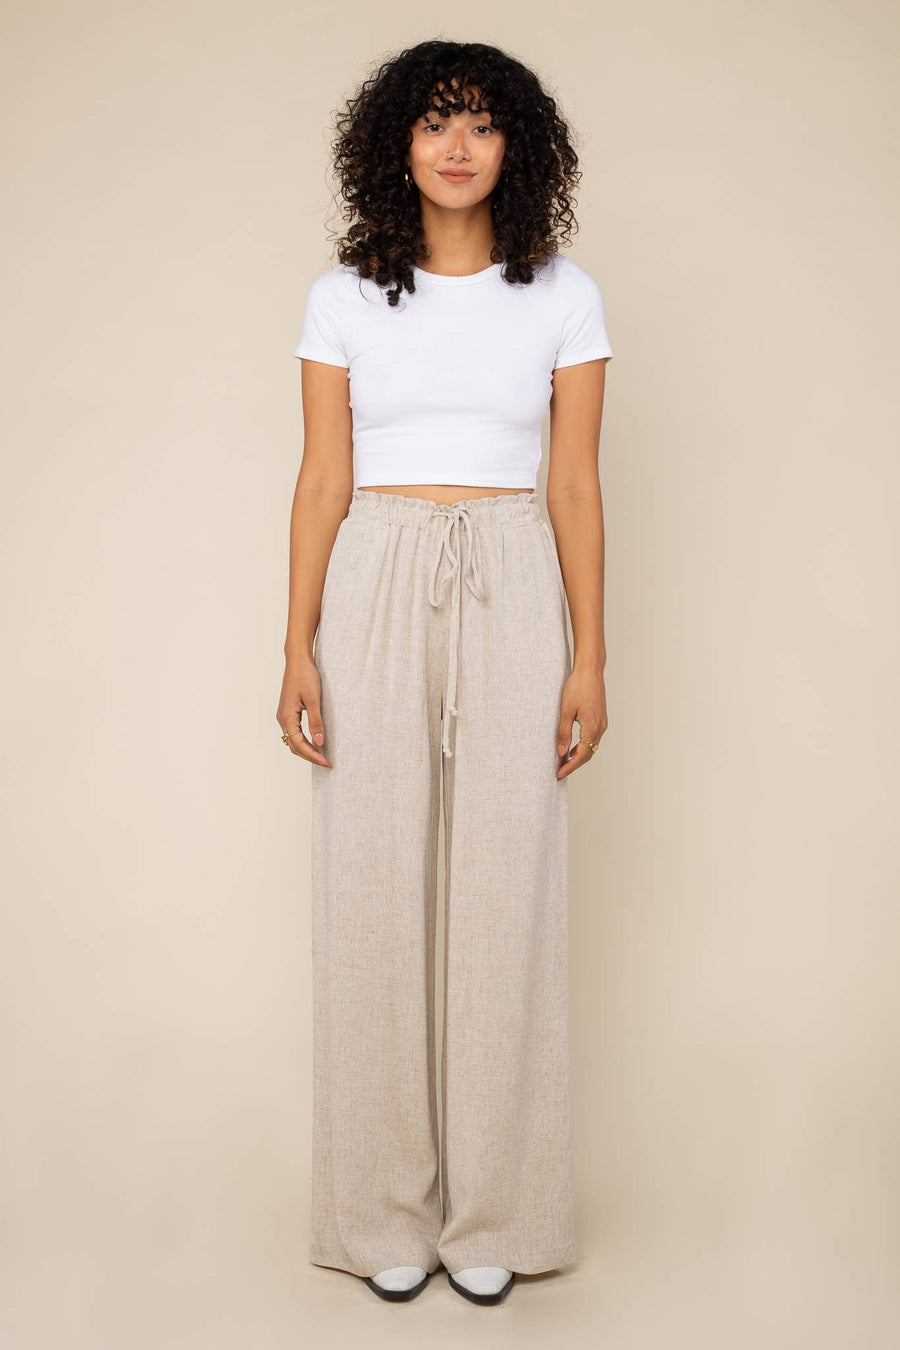 linen natural color draw string pant, made in LA